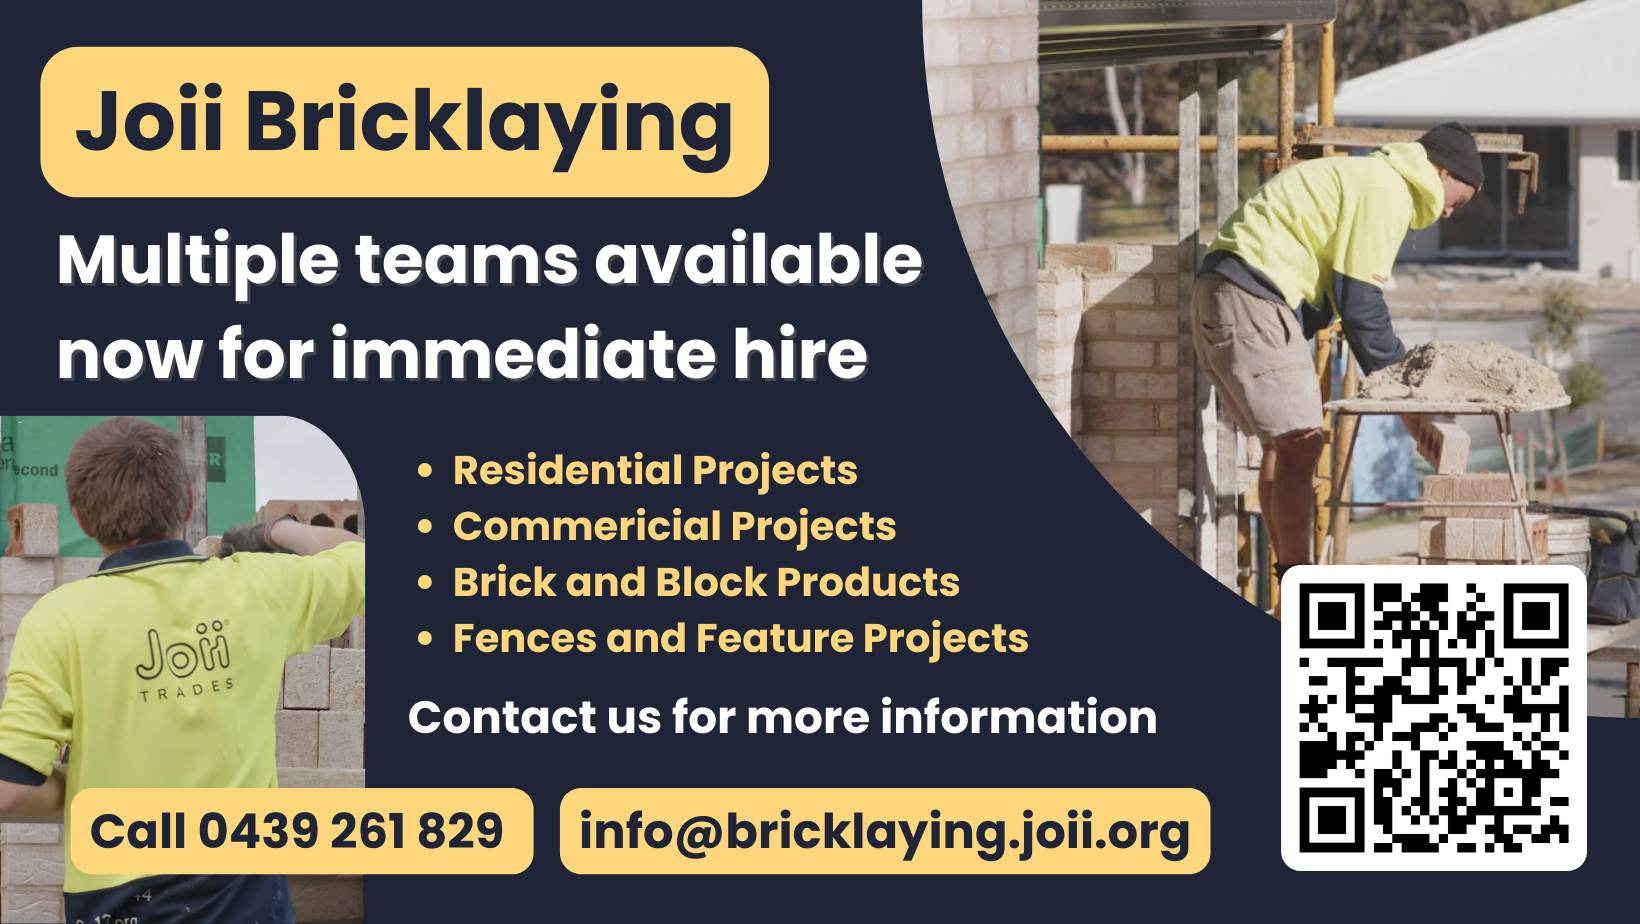 Joii Bricklaying has teams available for Immediate hire - Call Tate on 0439261829 for info.